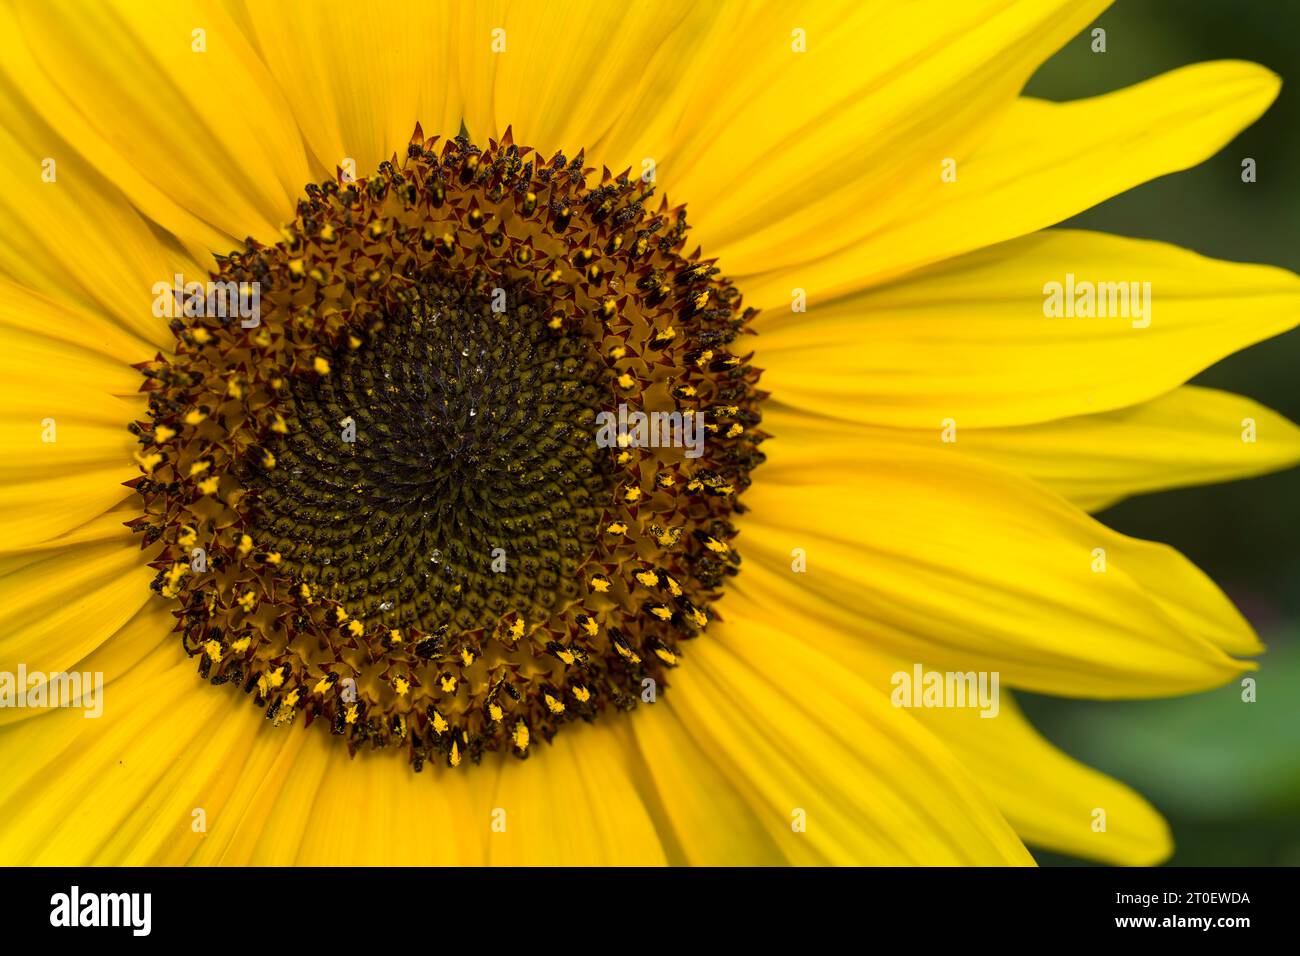 Close-up of a sunflower (Helianthus annuus) flower, flower basket with tubular flowers and yellow petals, Germany Stock Photo